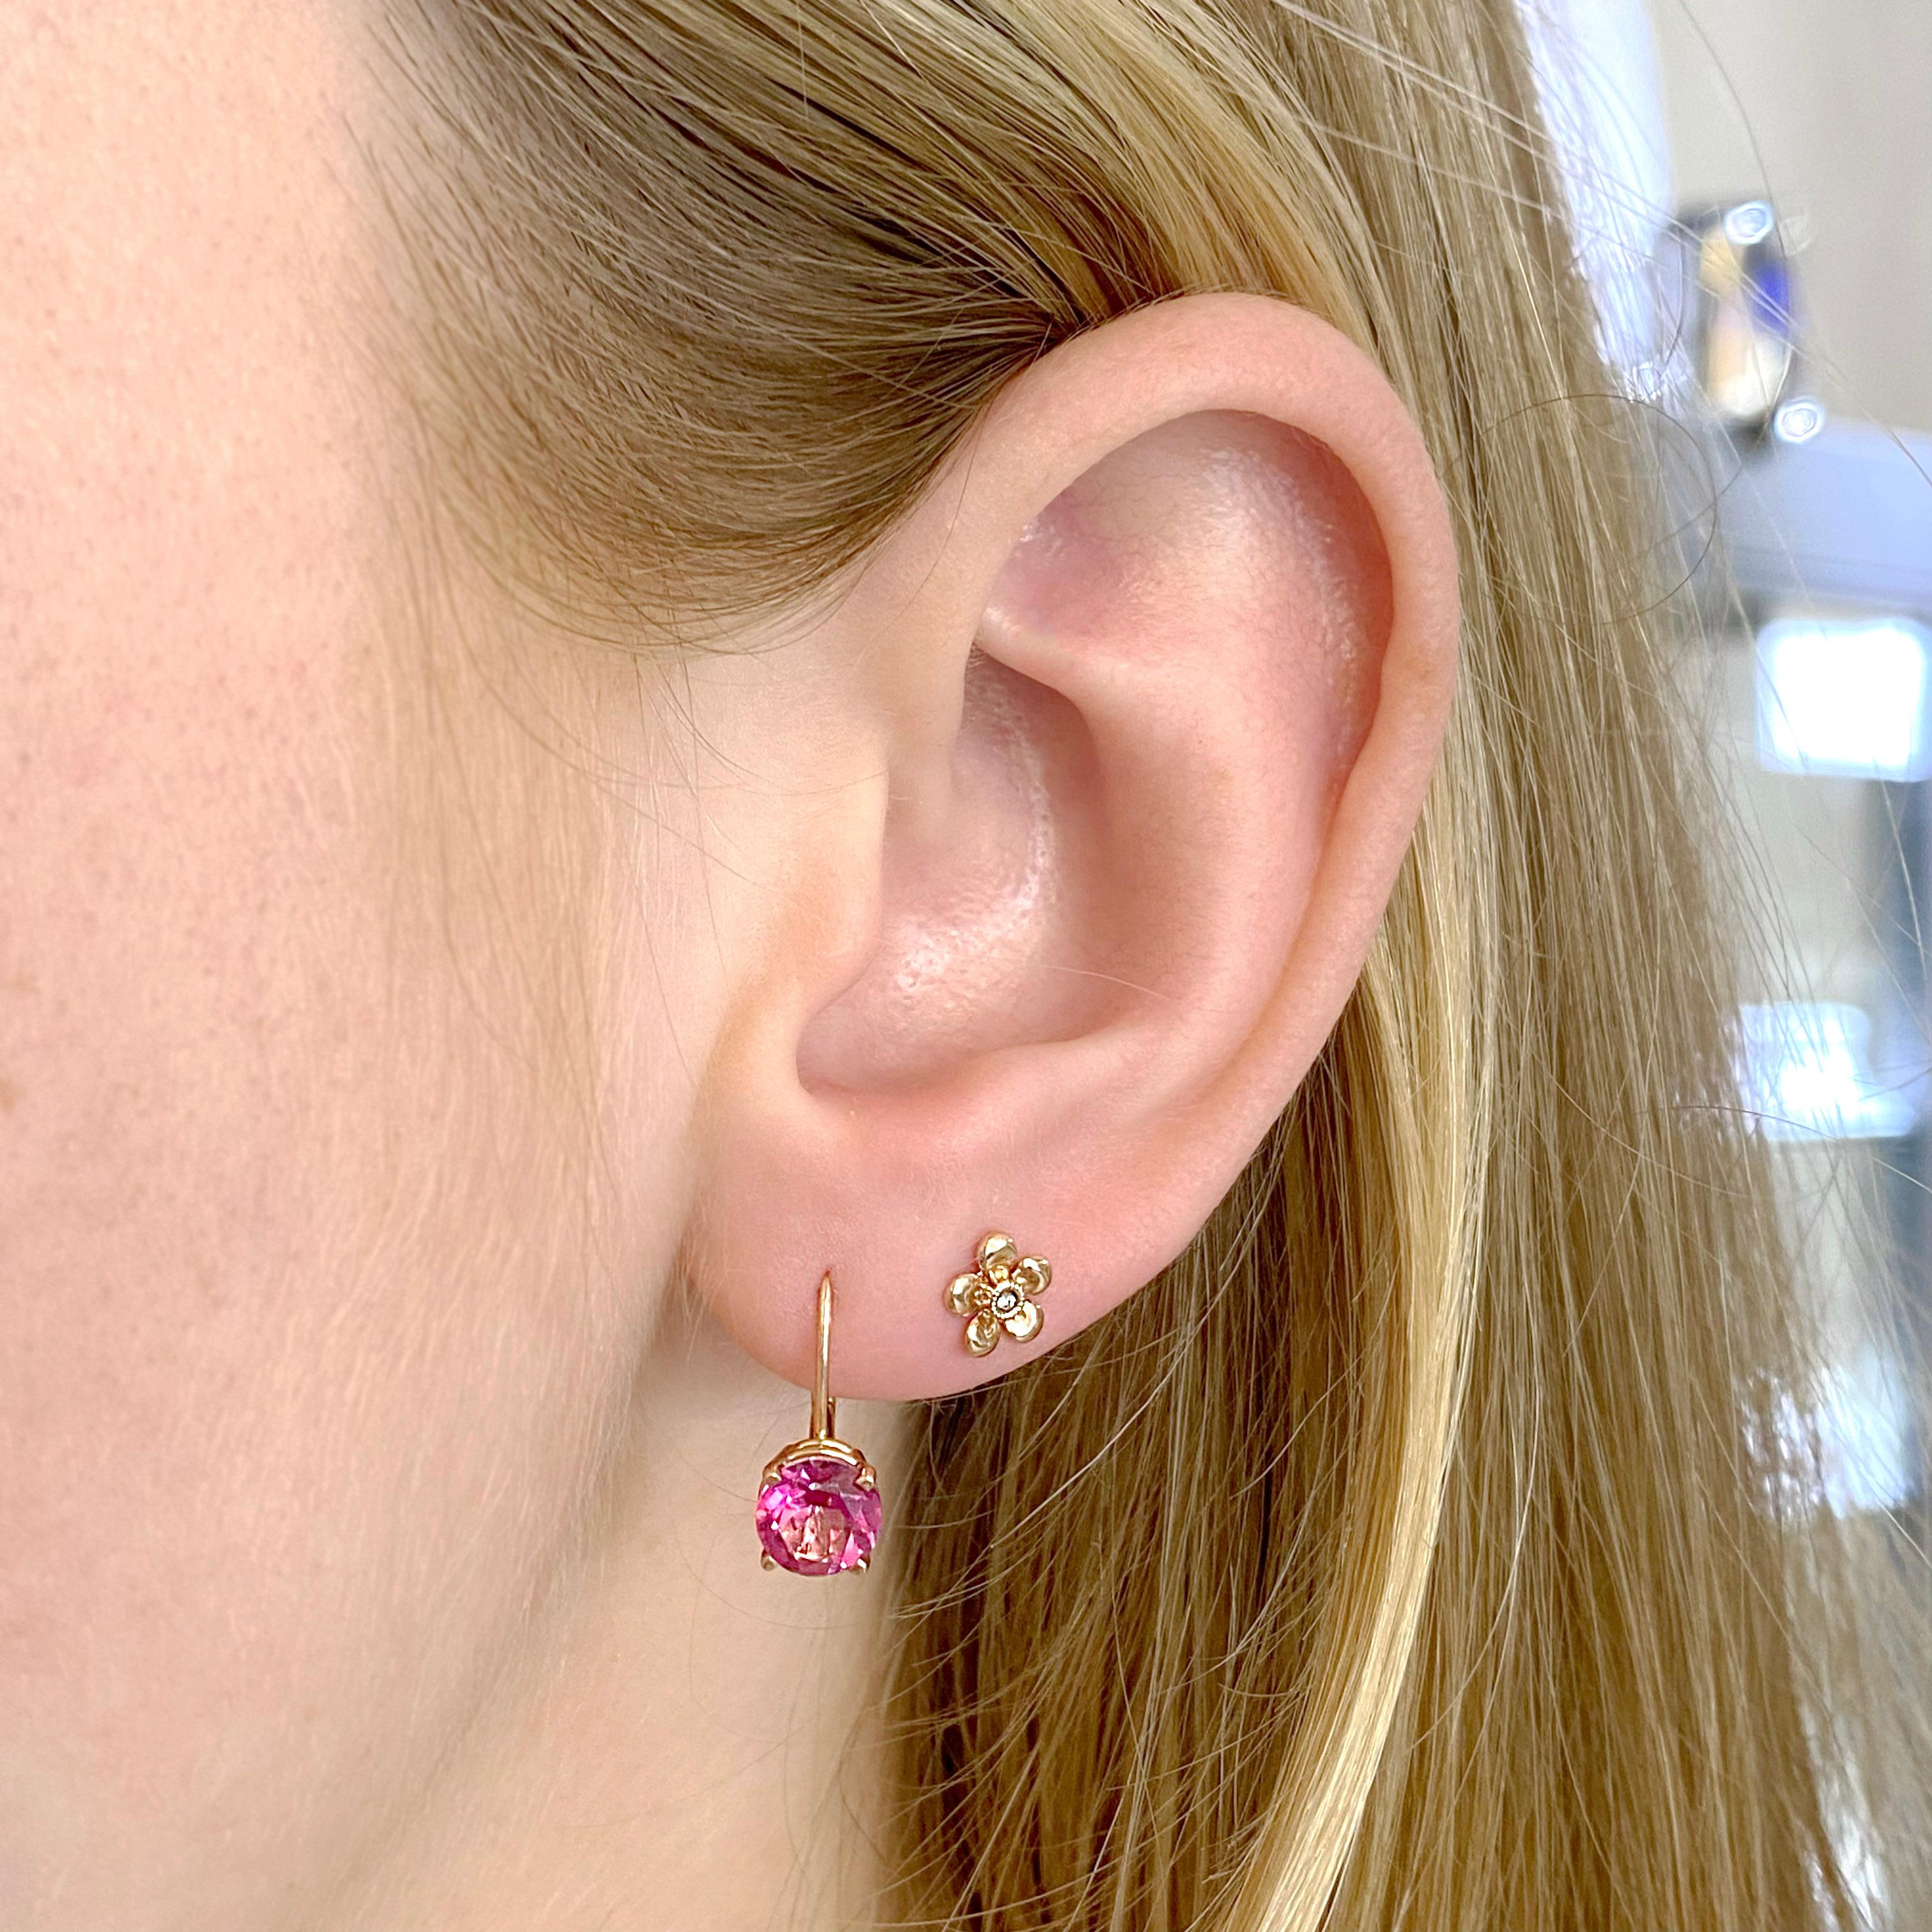 Rose Flower Earring Diamond Center, Style Minimalist, Children’s, Baby in Rose In New Condition For Sale In Austin, TX